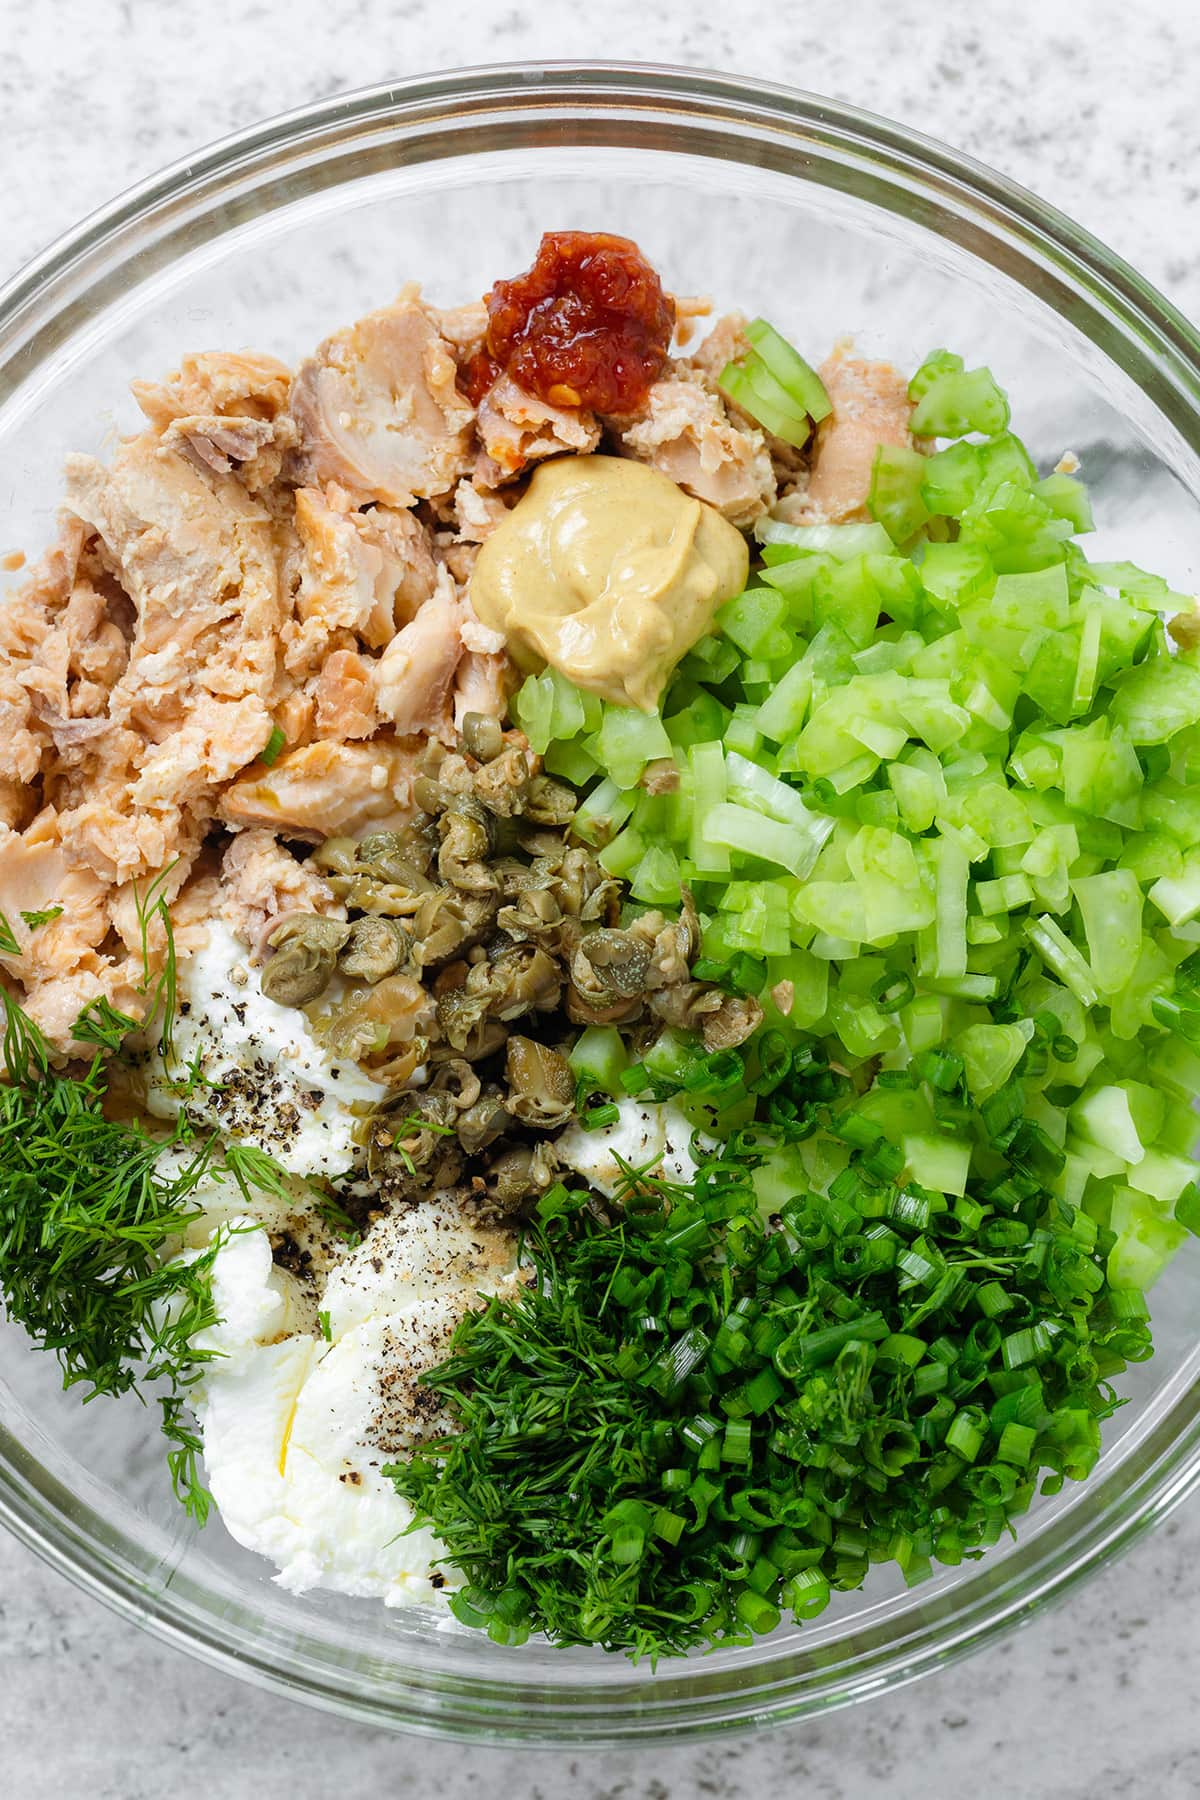 Canned salmon, chopped celery, herbs, and capers in a large glass bowl.